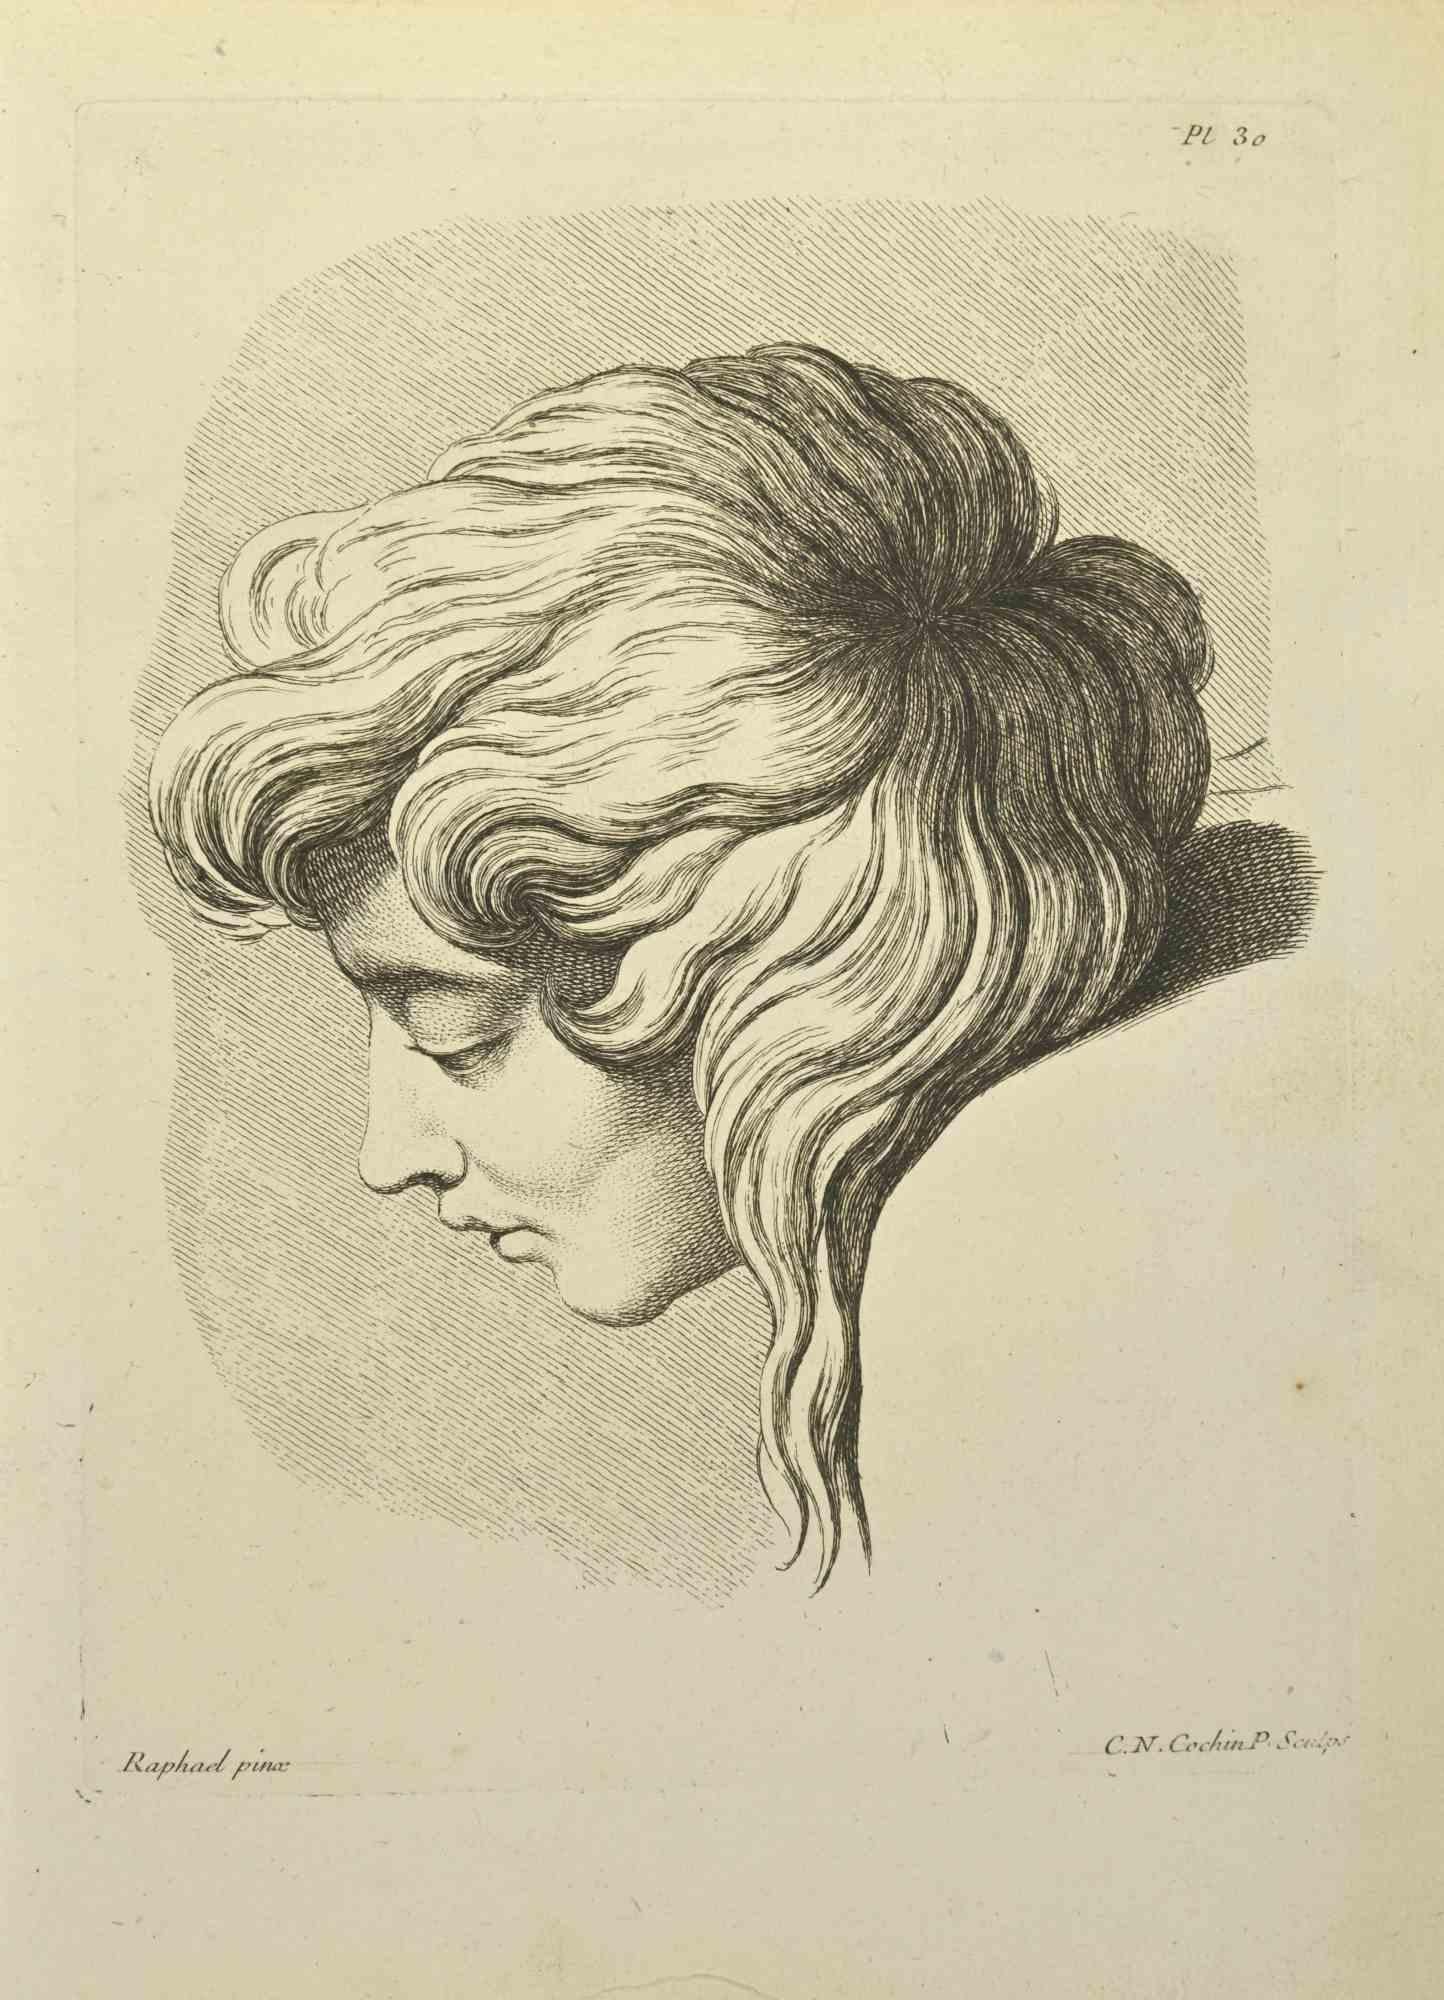 Portrait after Raphael is an etching realized by Nicholas Cochin in 1755.

Signed on the plate.

Good conditions.

The artwork is depicted through confident strokes.

The etching was realized for the anatomy study “JOMBERT, Charles-Antoine